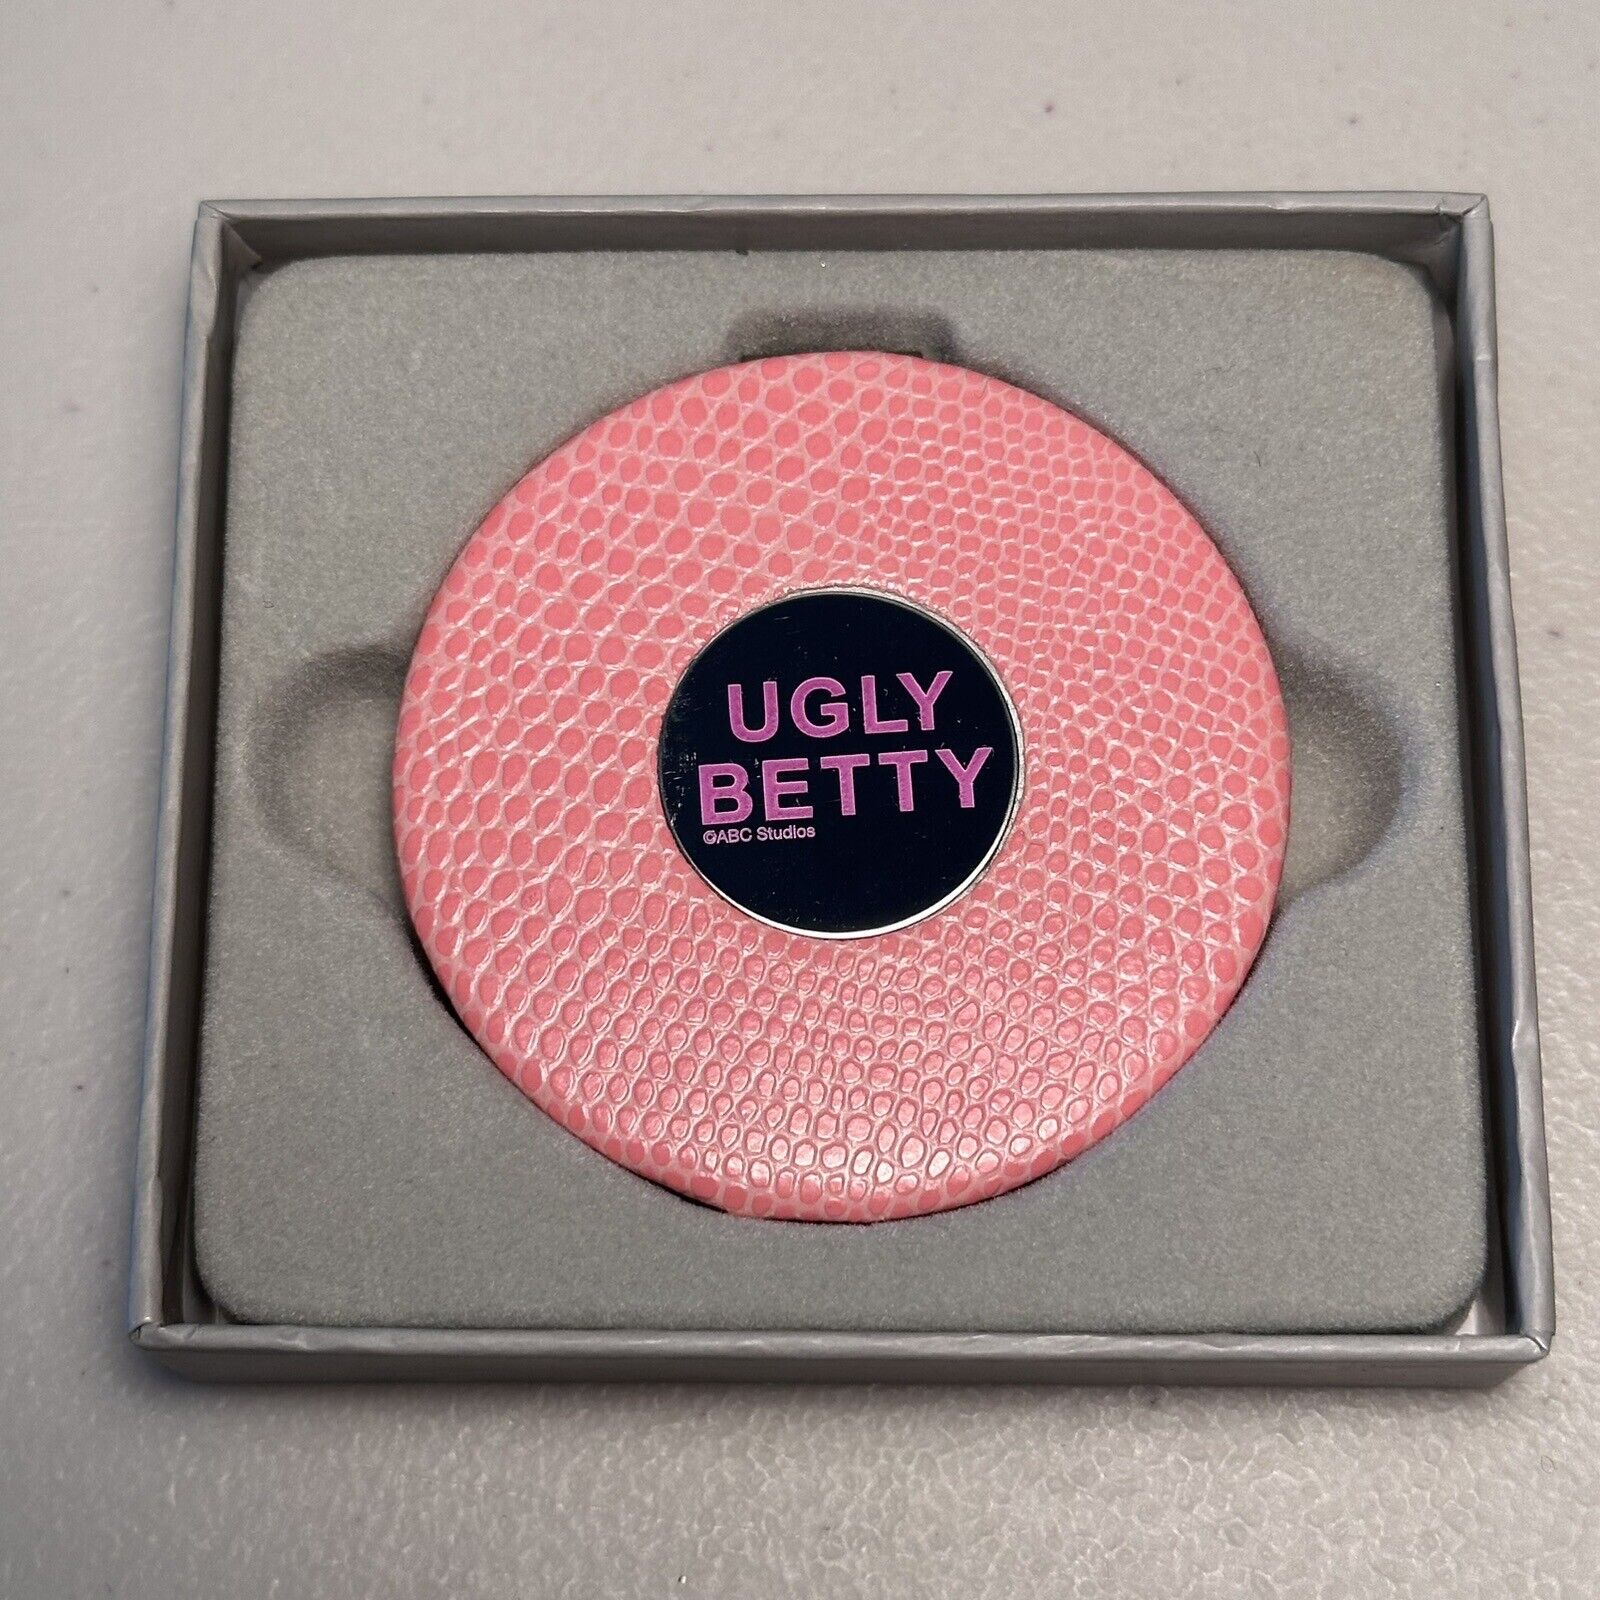 Ugly Betty Purse Compact Mirror Pink ABC Studios Tv Show